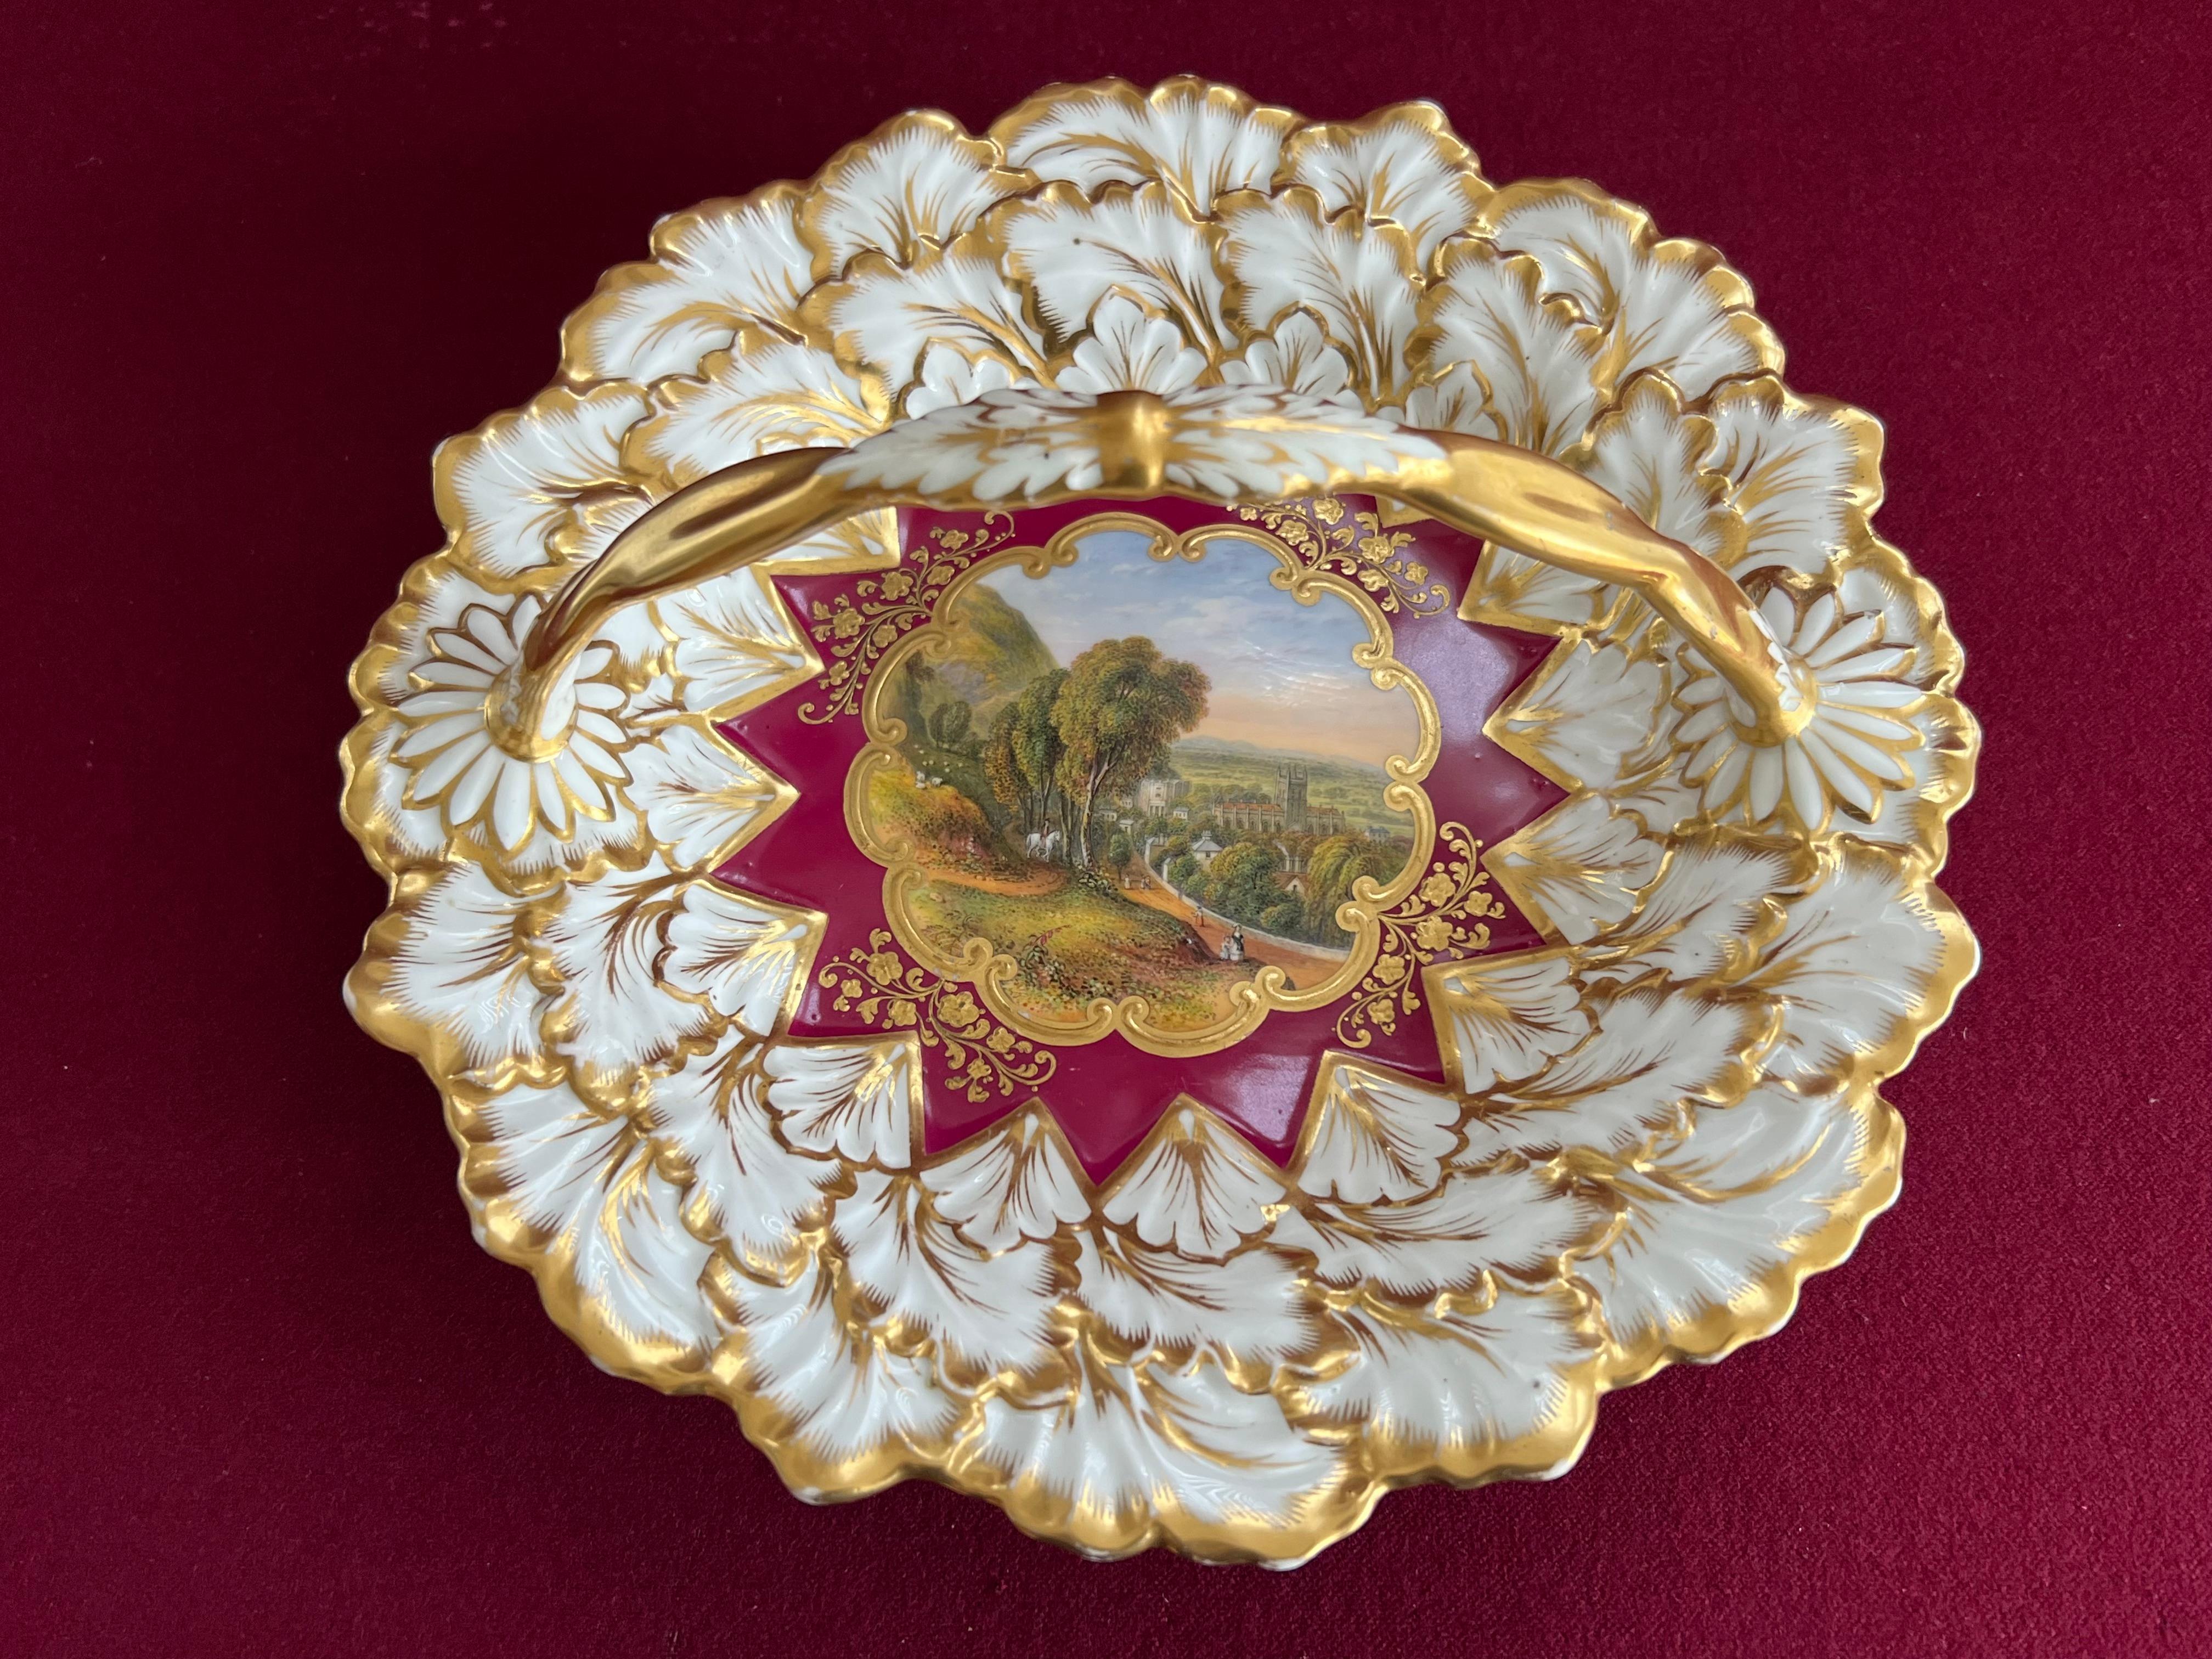 A Chamberlain & Co Worcester porcelain basket c.1845. Of circular form with an overhead handle, moulded with overlapping leaves, the claret red ground reserved with a central cartouche finely painted with a view of Malvern, with raised gilt